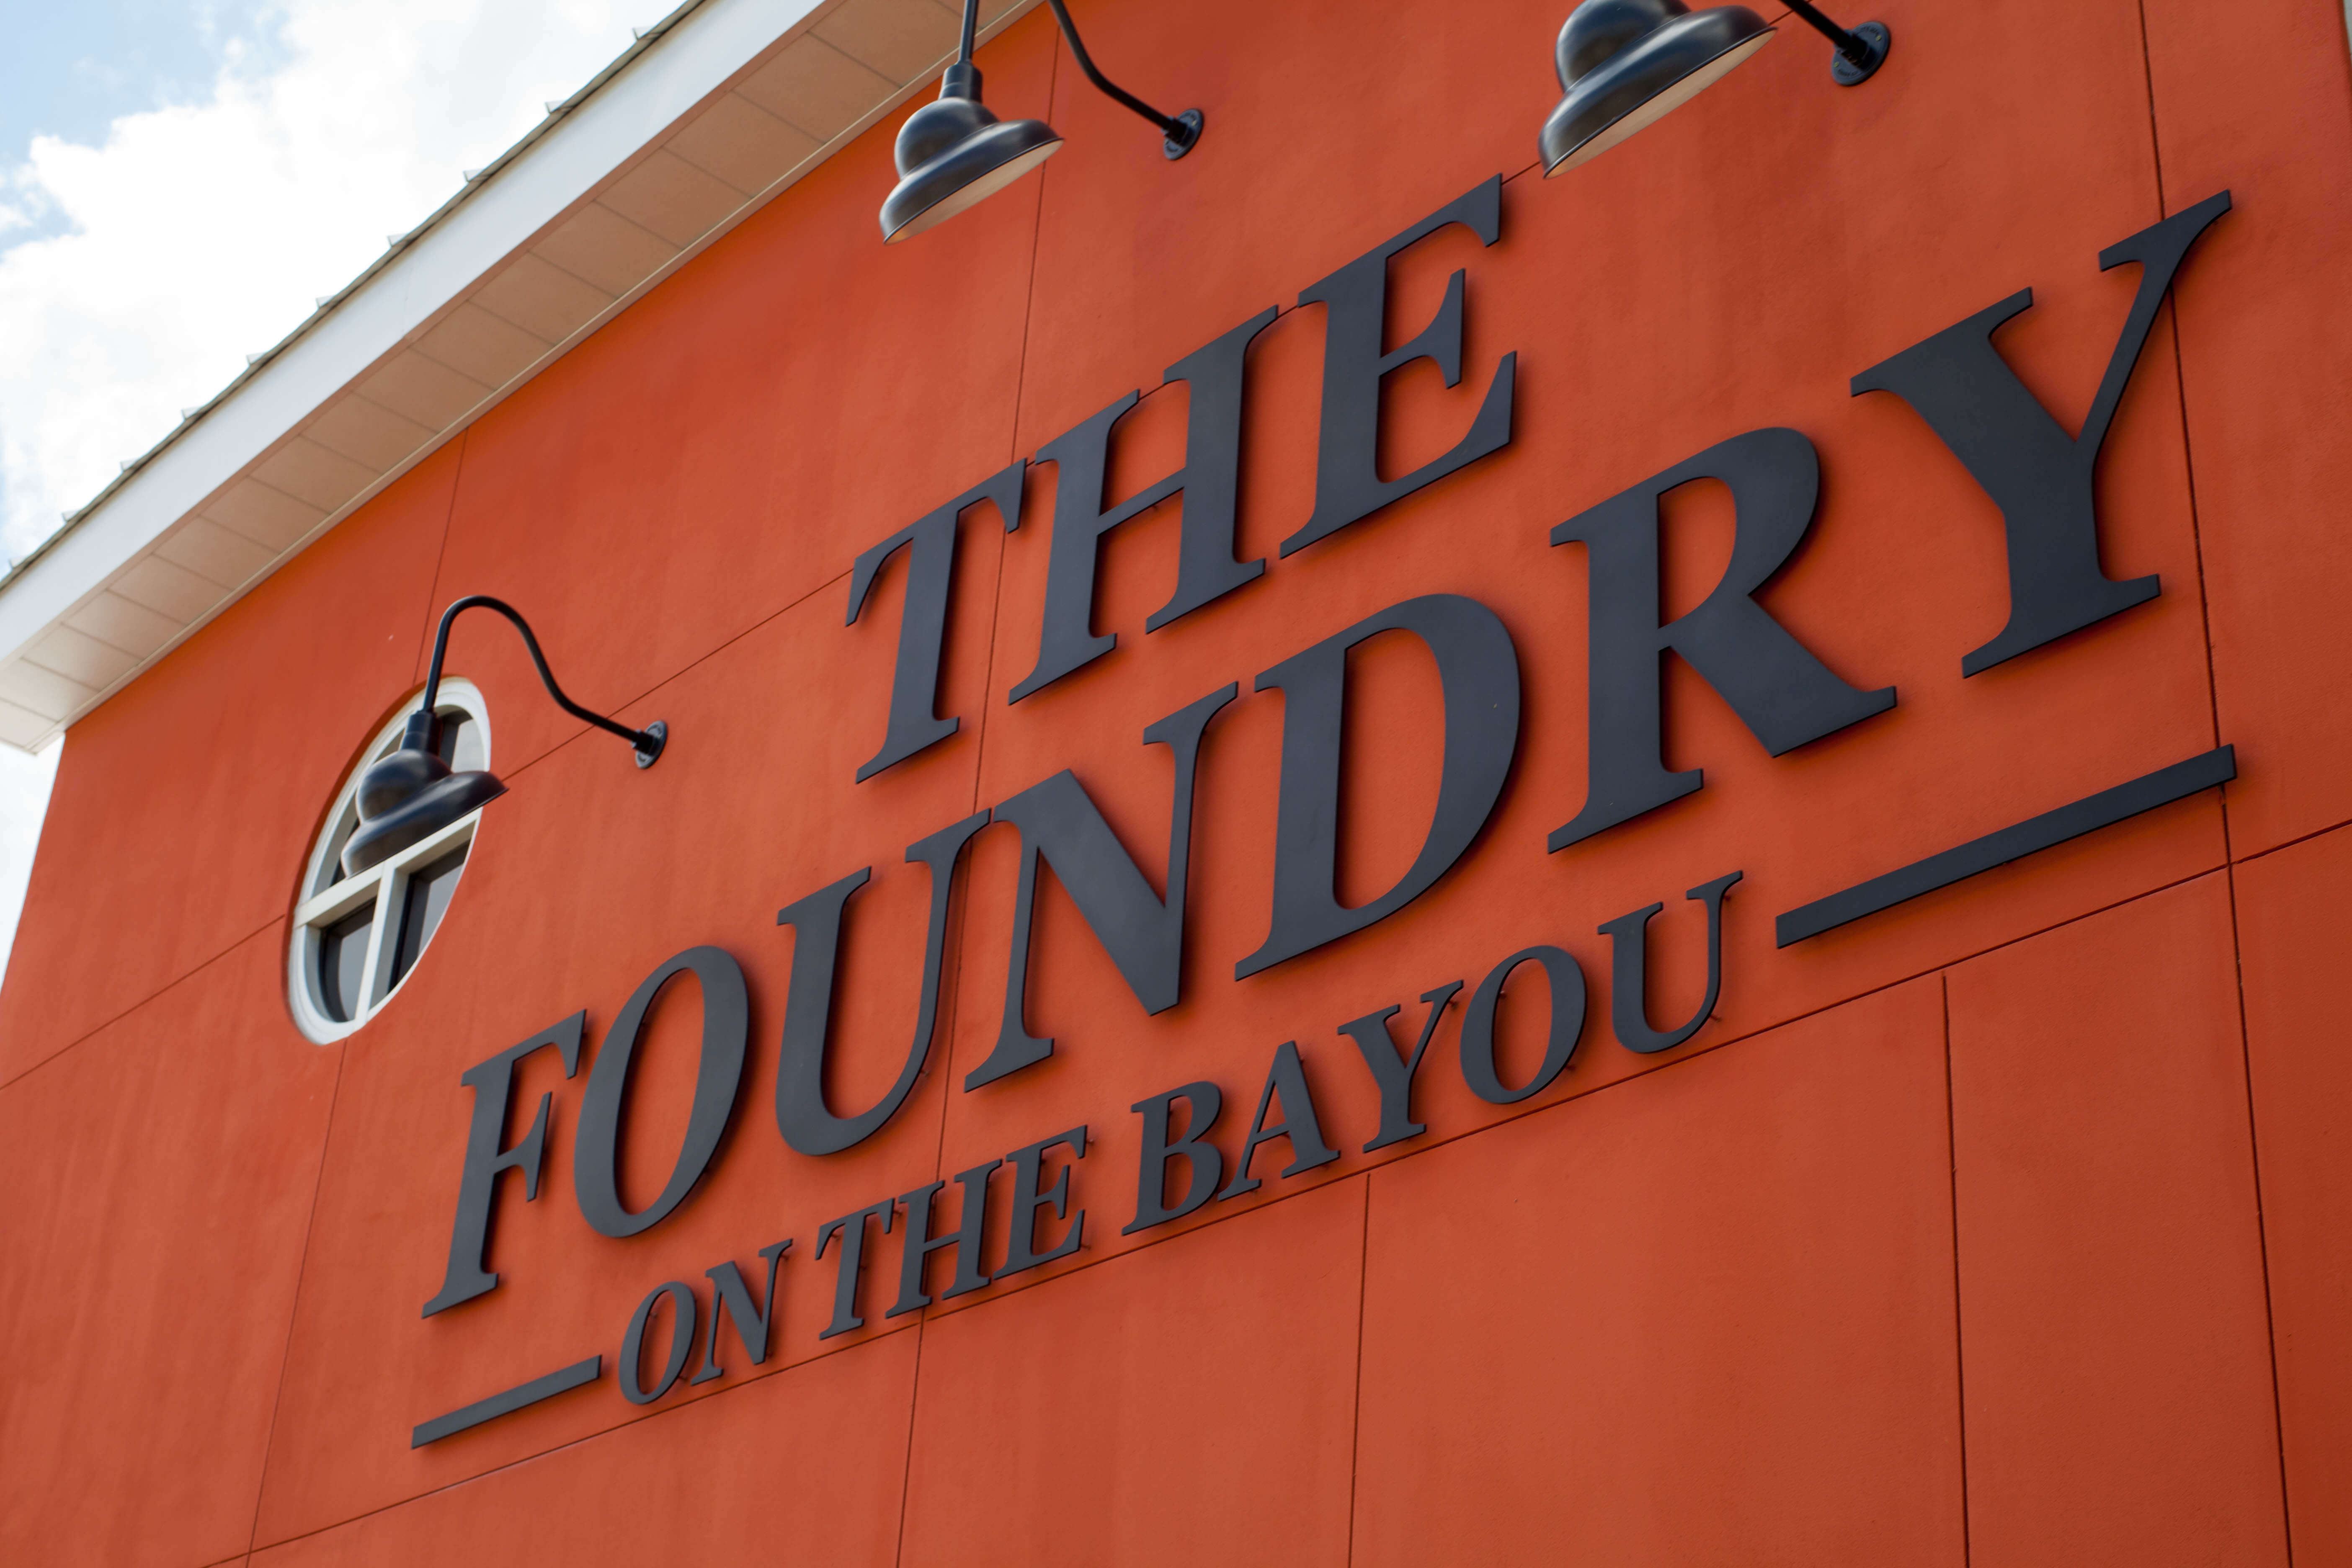 The Foundry on the Bayou - 1